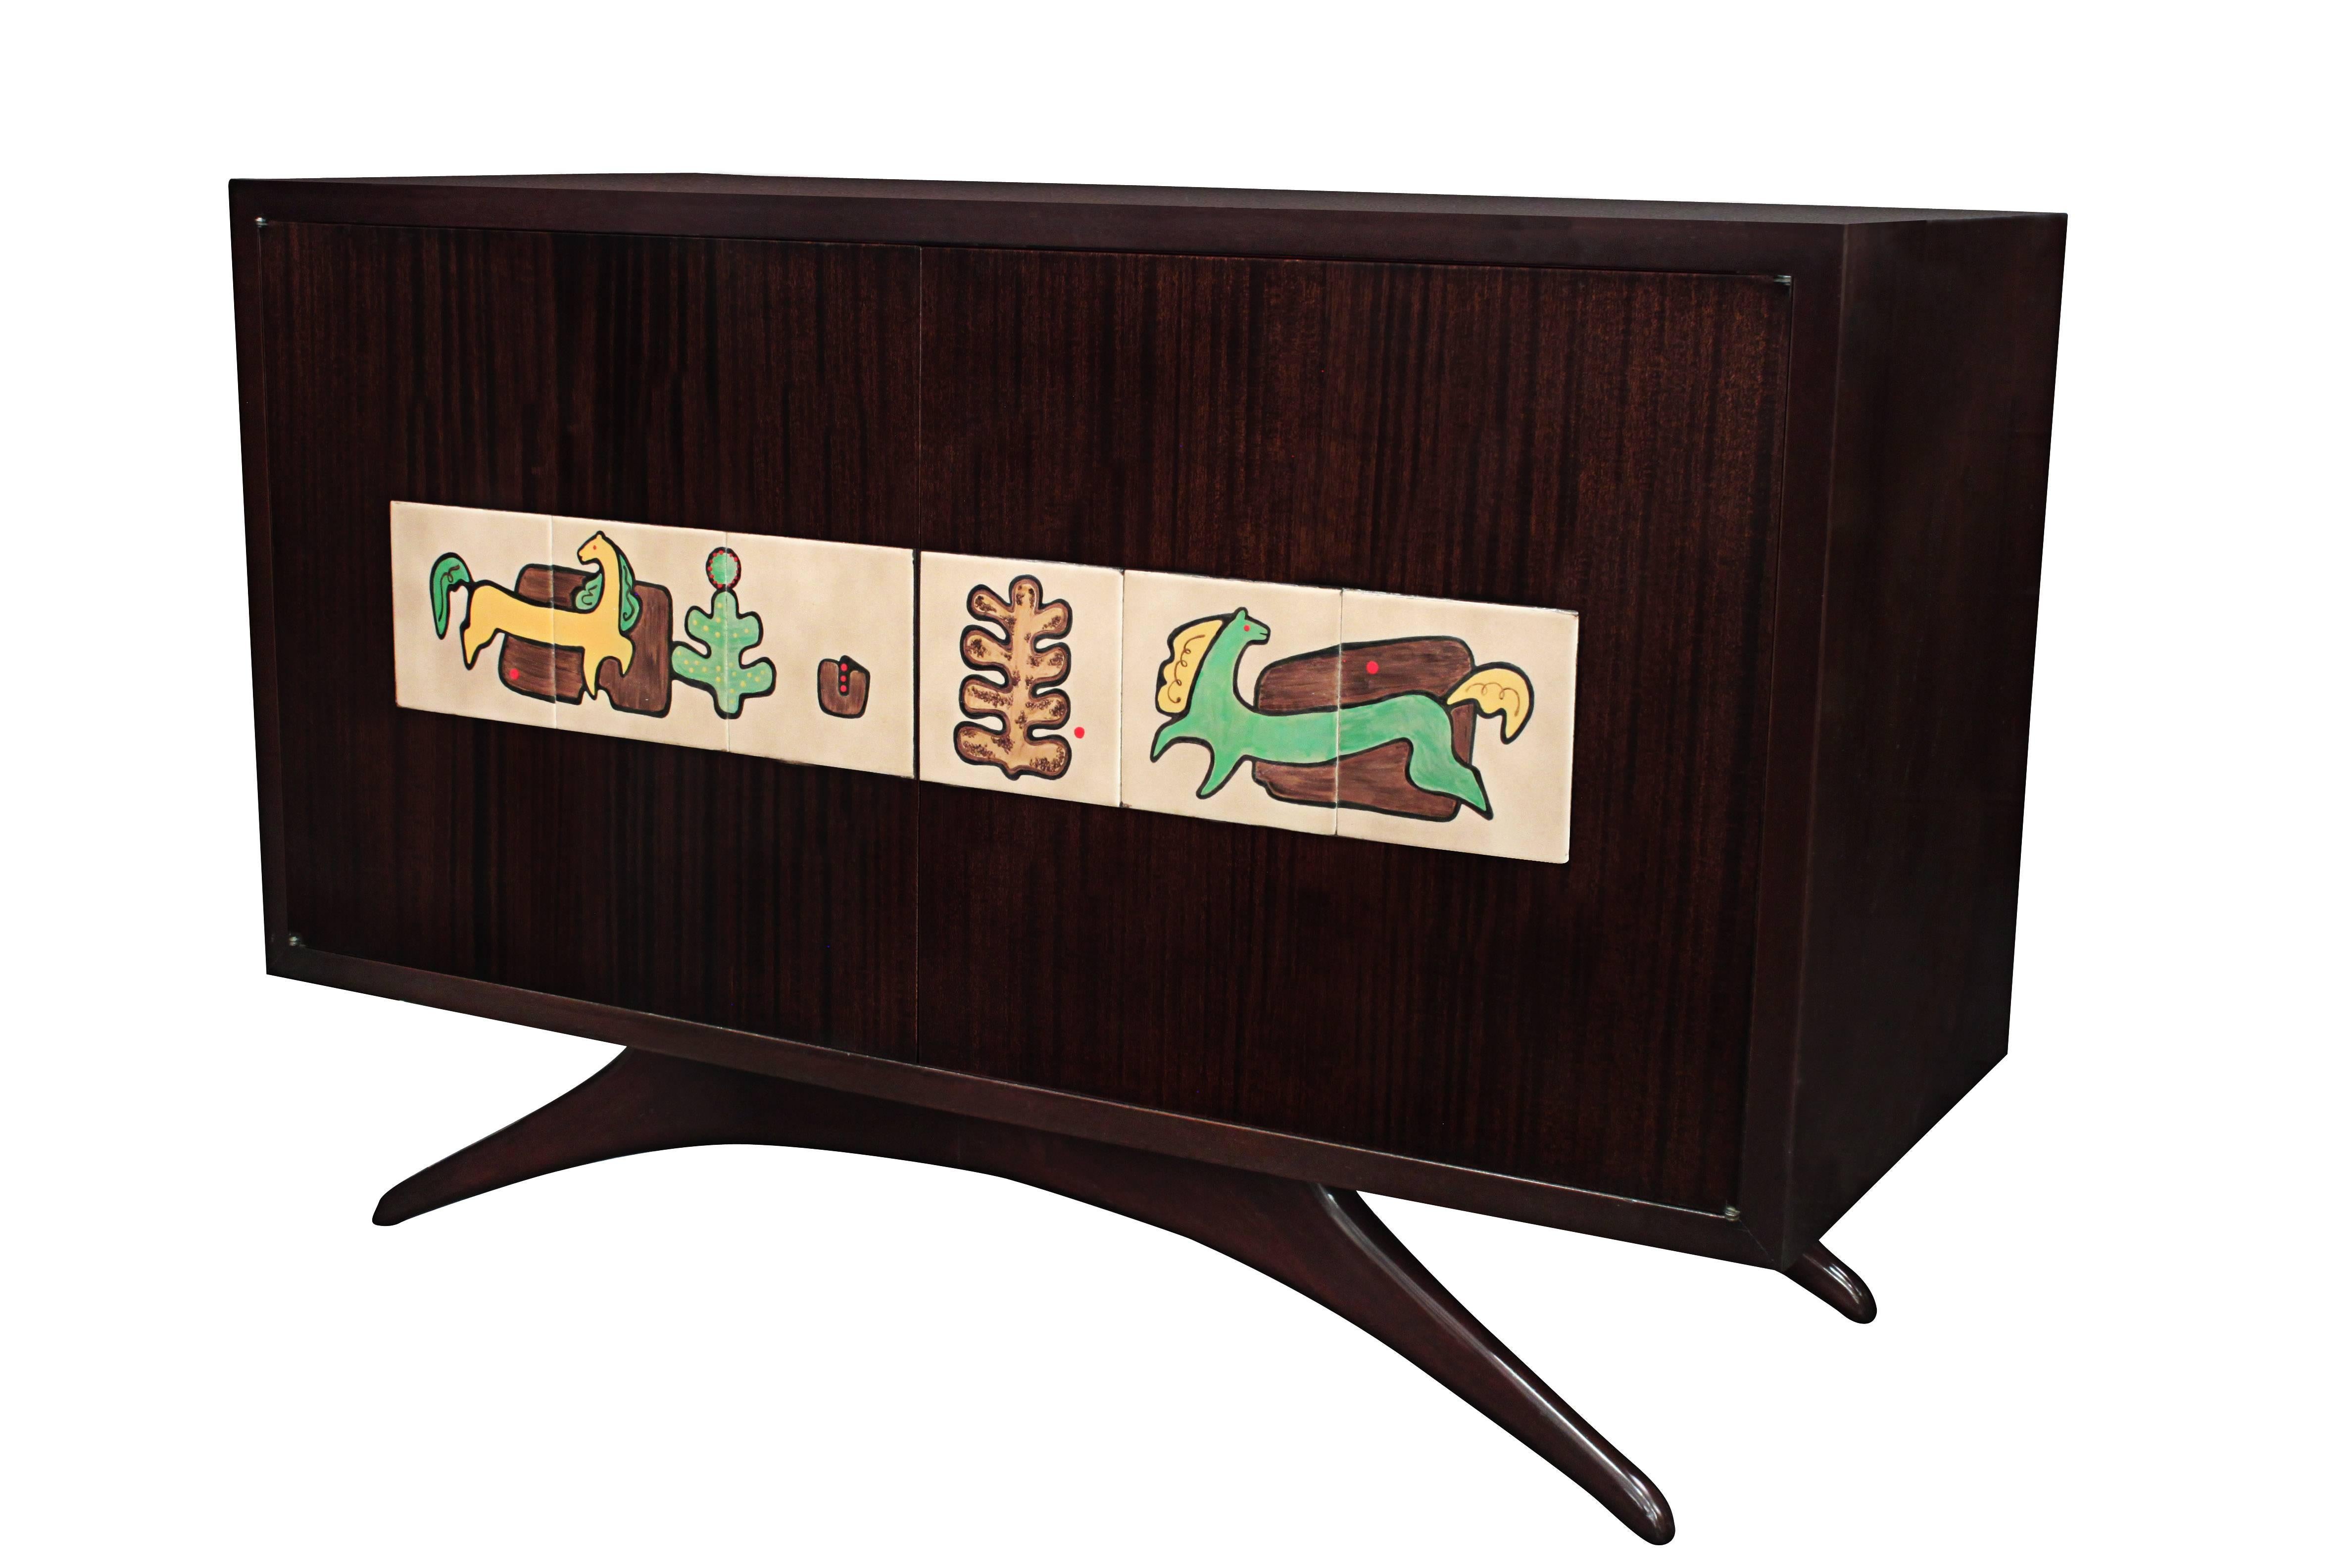 Rare and early cabinet in mahogany with iconic splayed legs and hand painted ceramic tiles by Alexandra Kasuba on doors by Vladimir Kagan, American, 1950s. Alexander Kasuba was a Russian artist who often collaborated with Kagan. The interior is clad